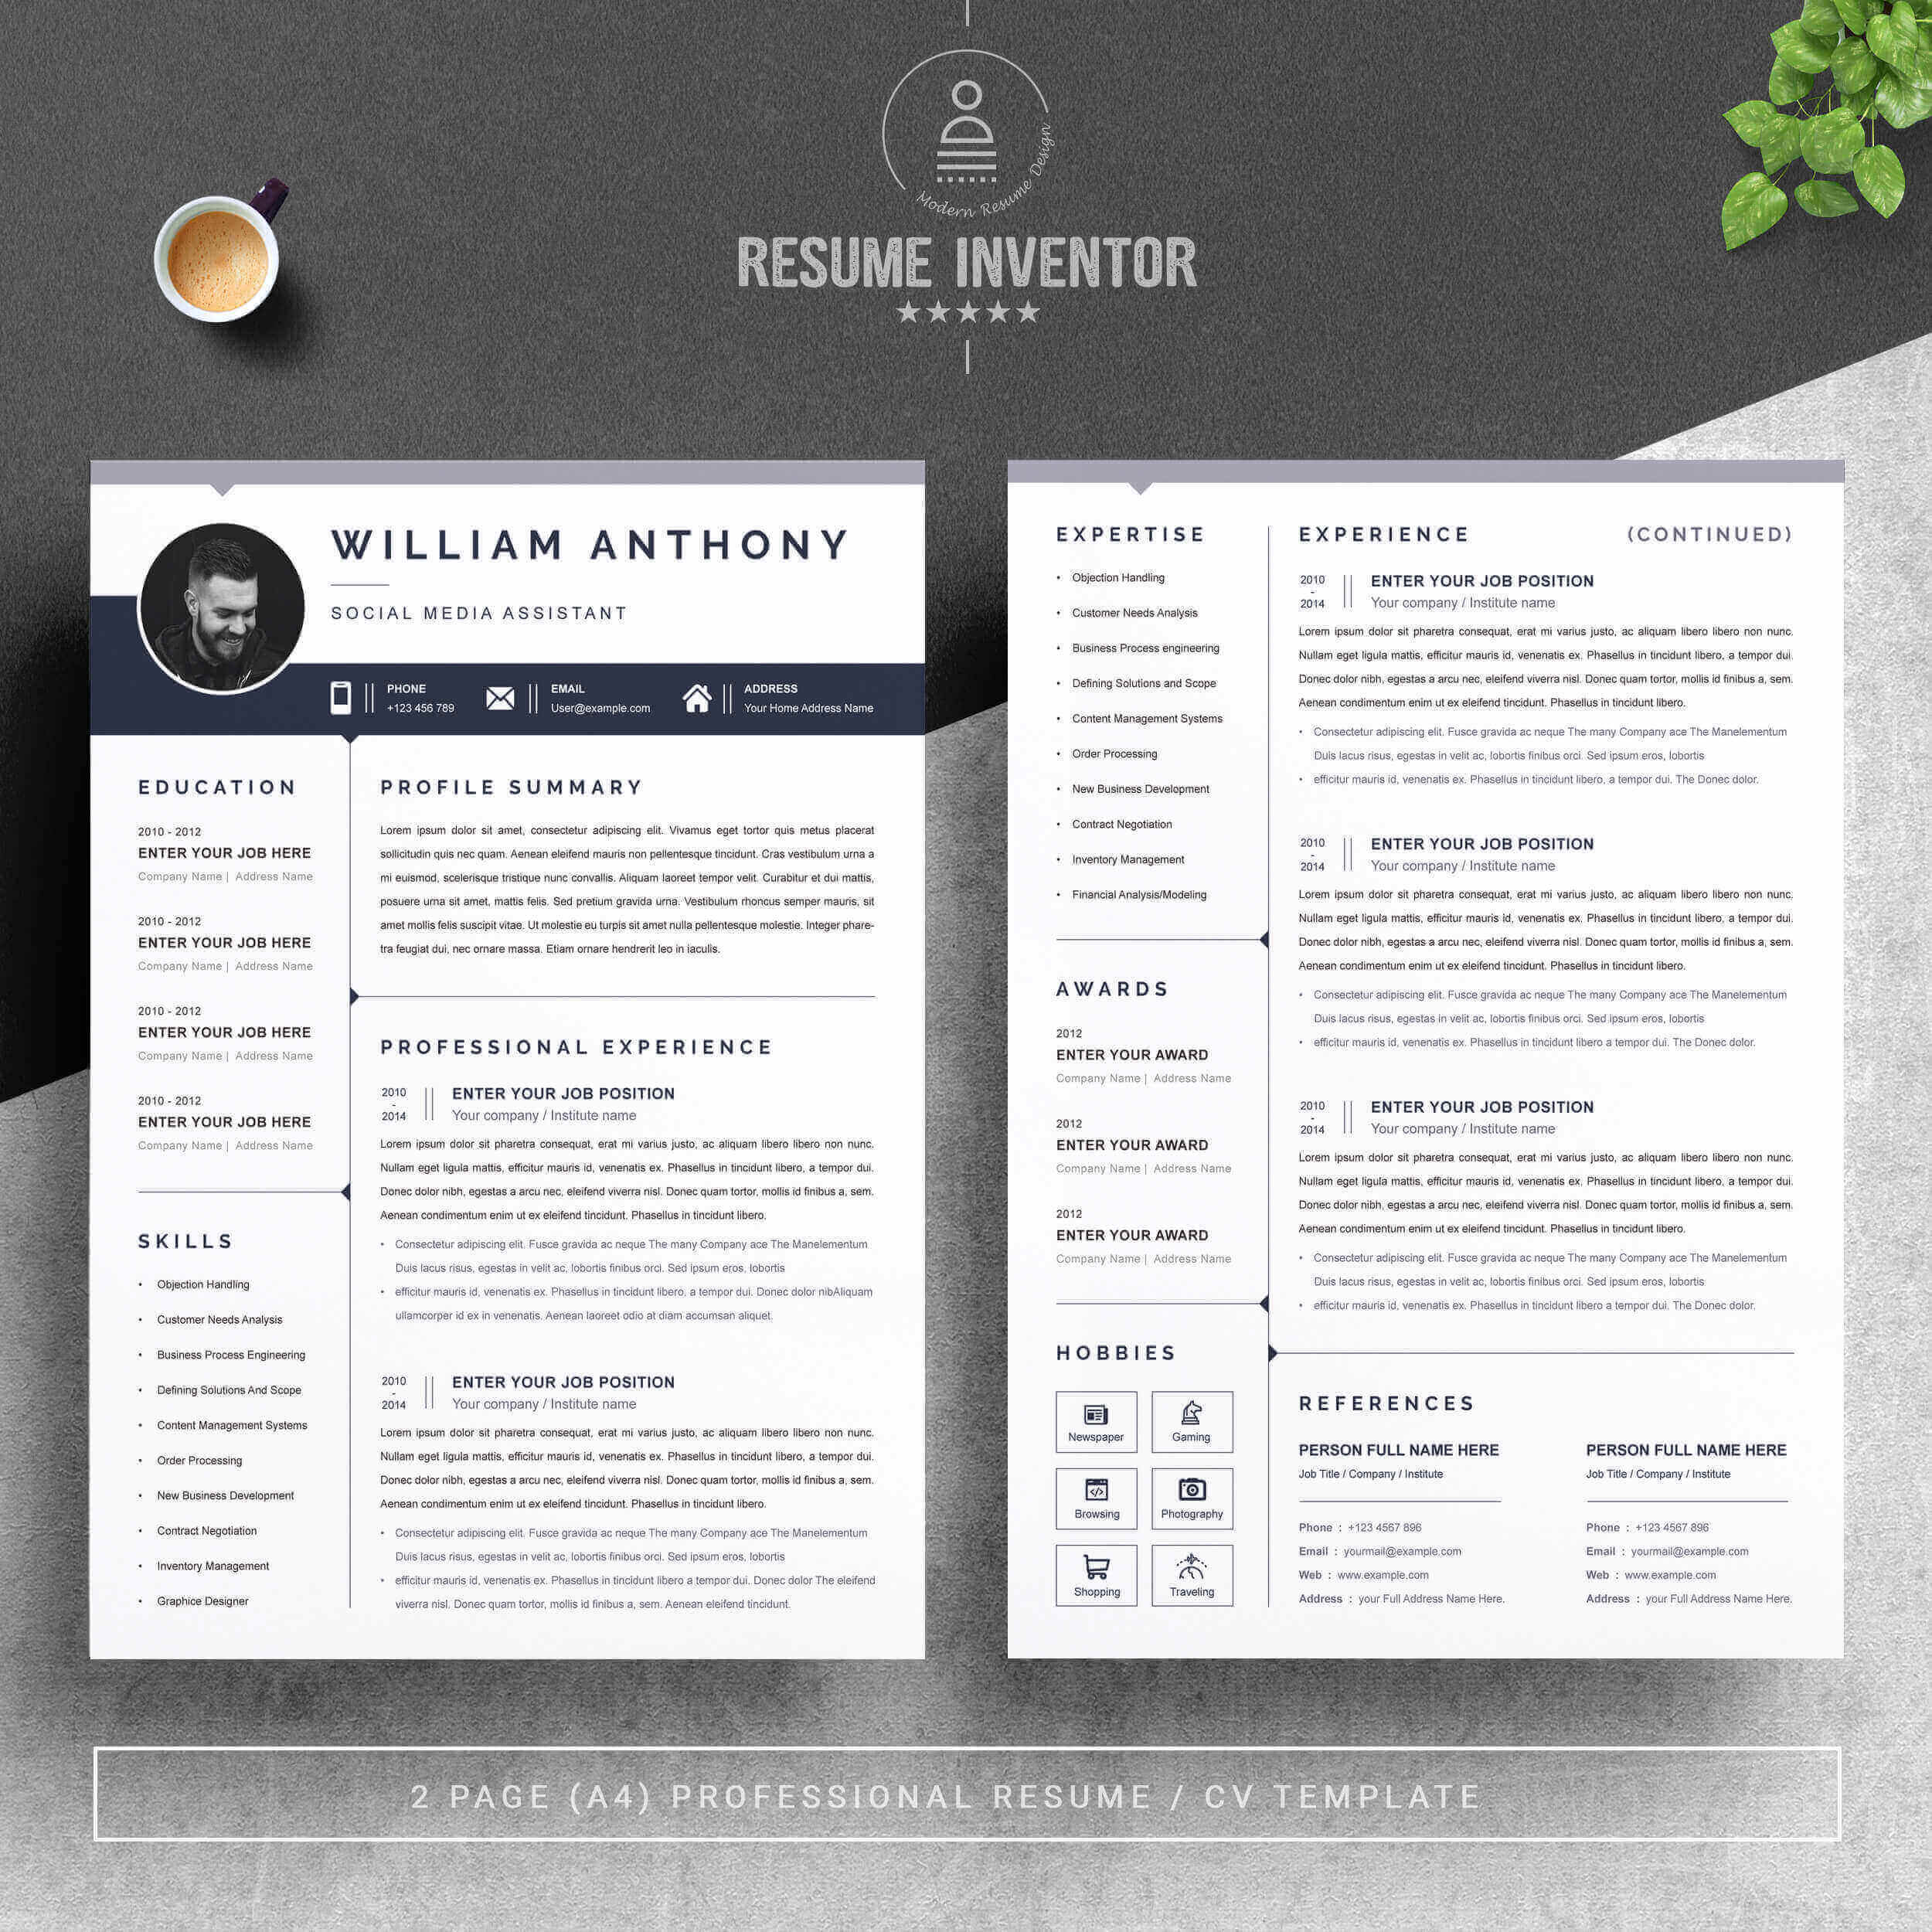 Social Media Assistant Resume Template Design | Resume Word Template preview image.